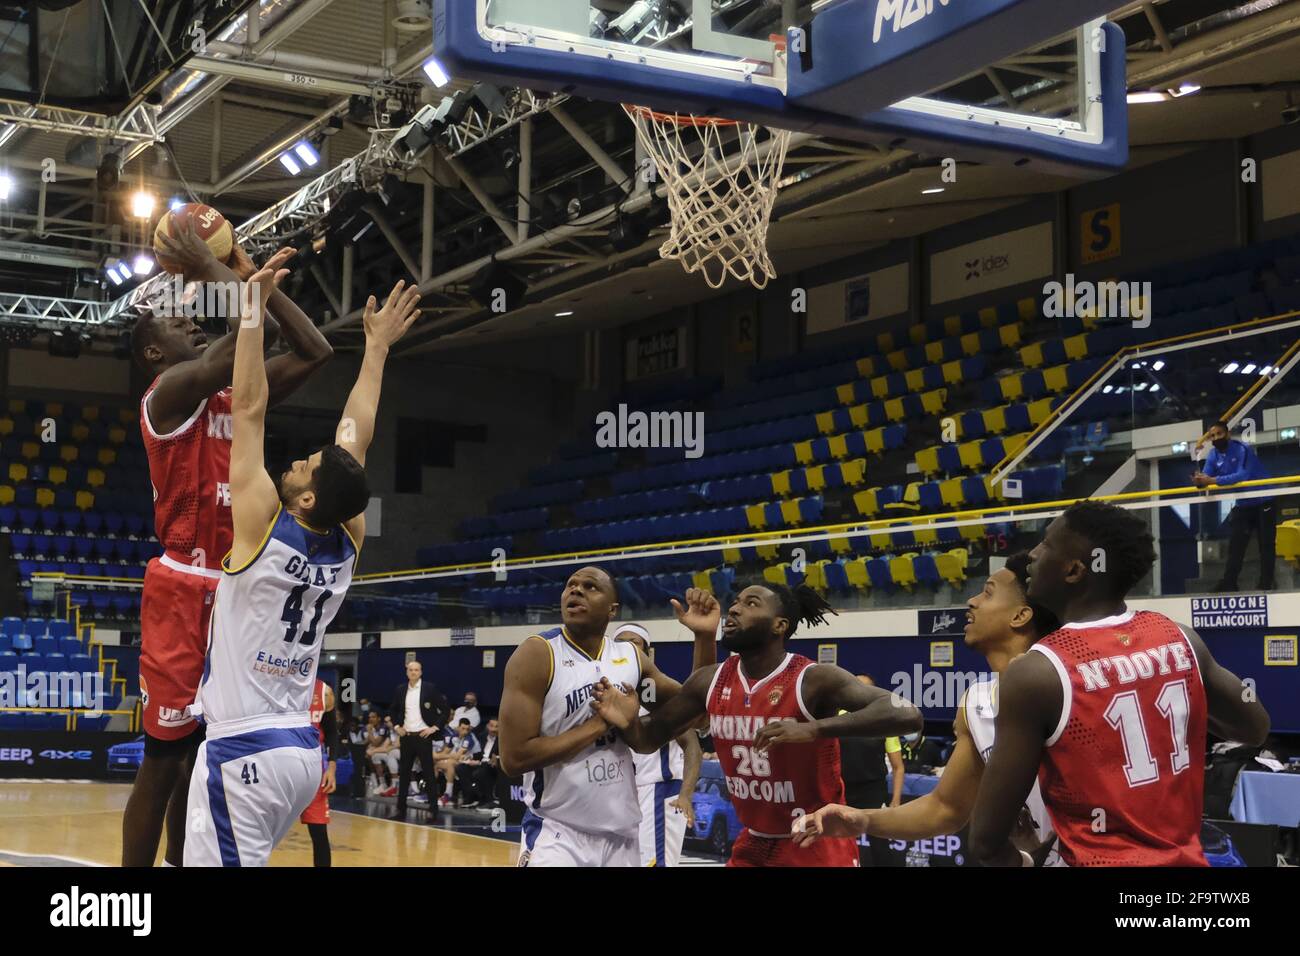 Levallois, Hauts de Seine, France. 20th Apr, 2021. IBRAHIMA FALL FAYE power  forward of Monaco in action during the French Basket championship Jeep Elite  between Levallois and Monaco at Marcel Cerdant stadium -